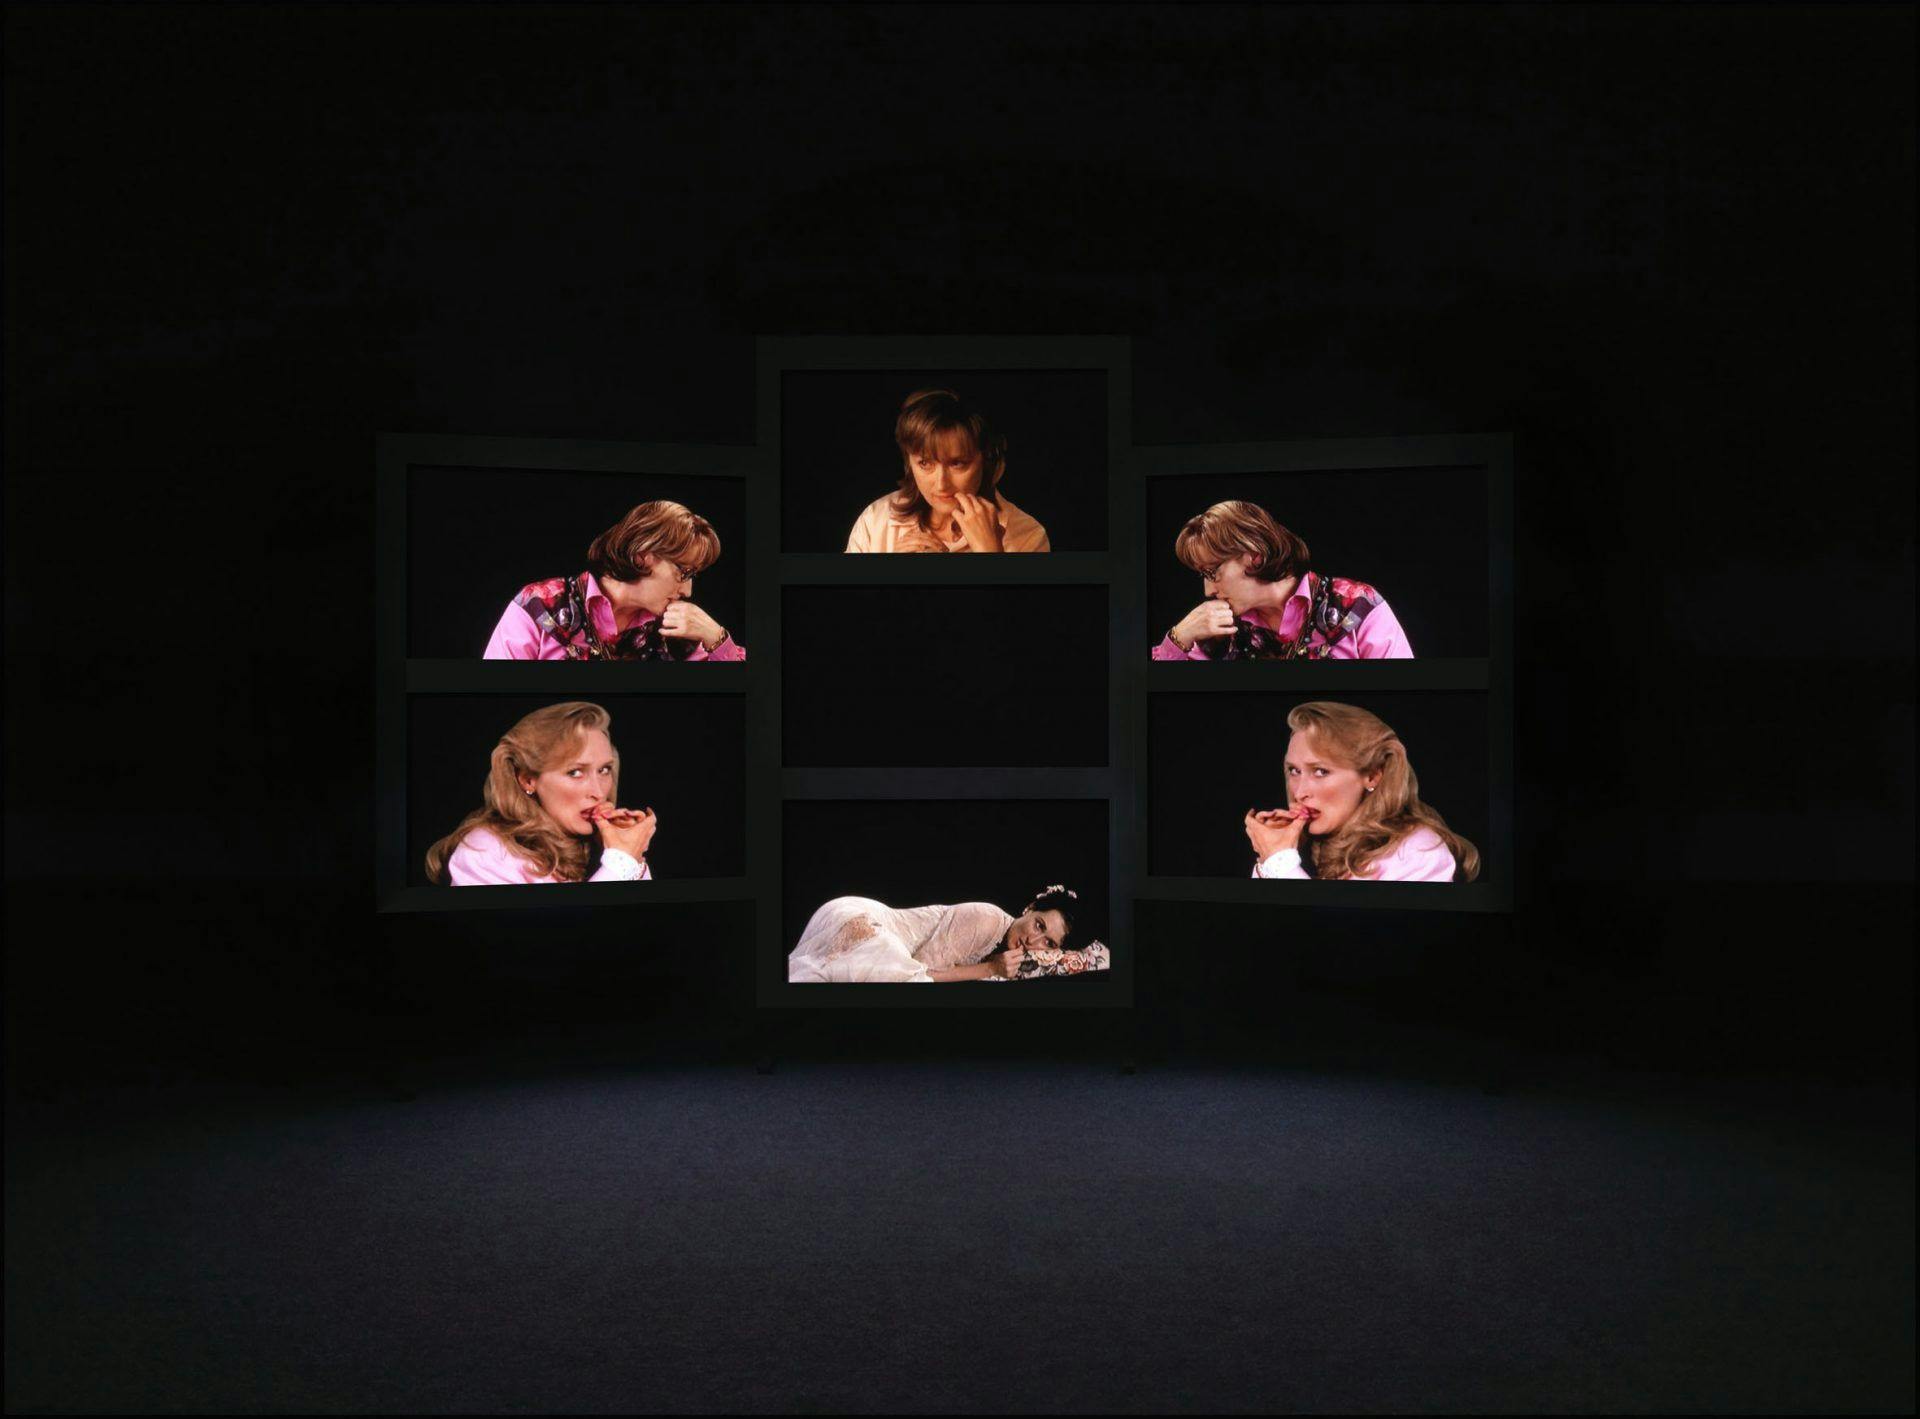 Candice Breitz, Still from Her, 2008. 7-channel video and sound installation, 23:56 min. Courtesy the artist and Temporäre Kunsthalle, Berlin.